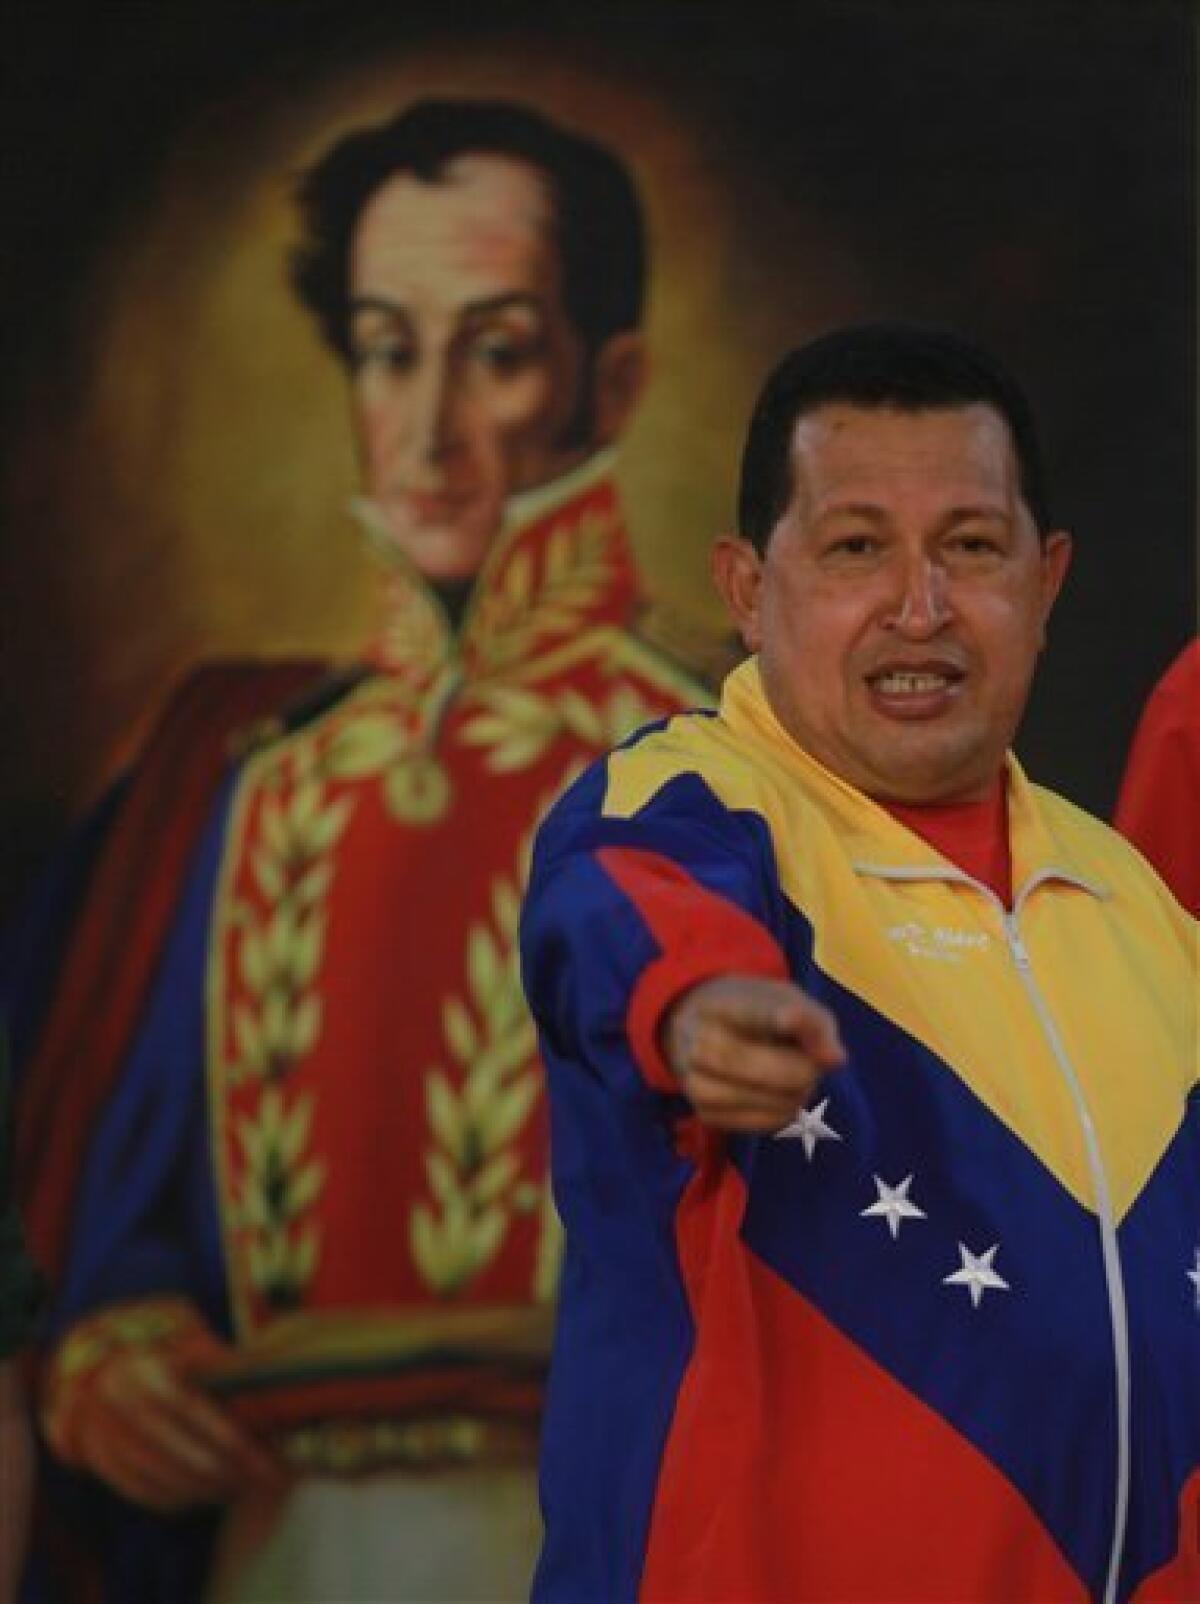 Venezuela's President Hugo Chavez gestures during a meeting with the athletes that will compete in the Central American Games at Miraflores presidential palace in Caracas, Wednesday, July 14, 2010. The games will be held July 16-Aug. 1 in Mayaguez, Puerto Rico. The painting at back portraits Venezuelan independence hero Simon Bolivar. (AP Photo/Fernando Llano)